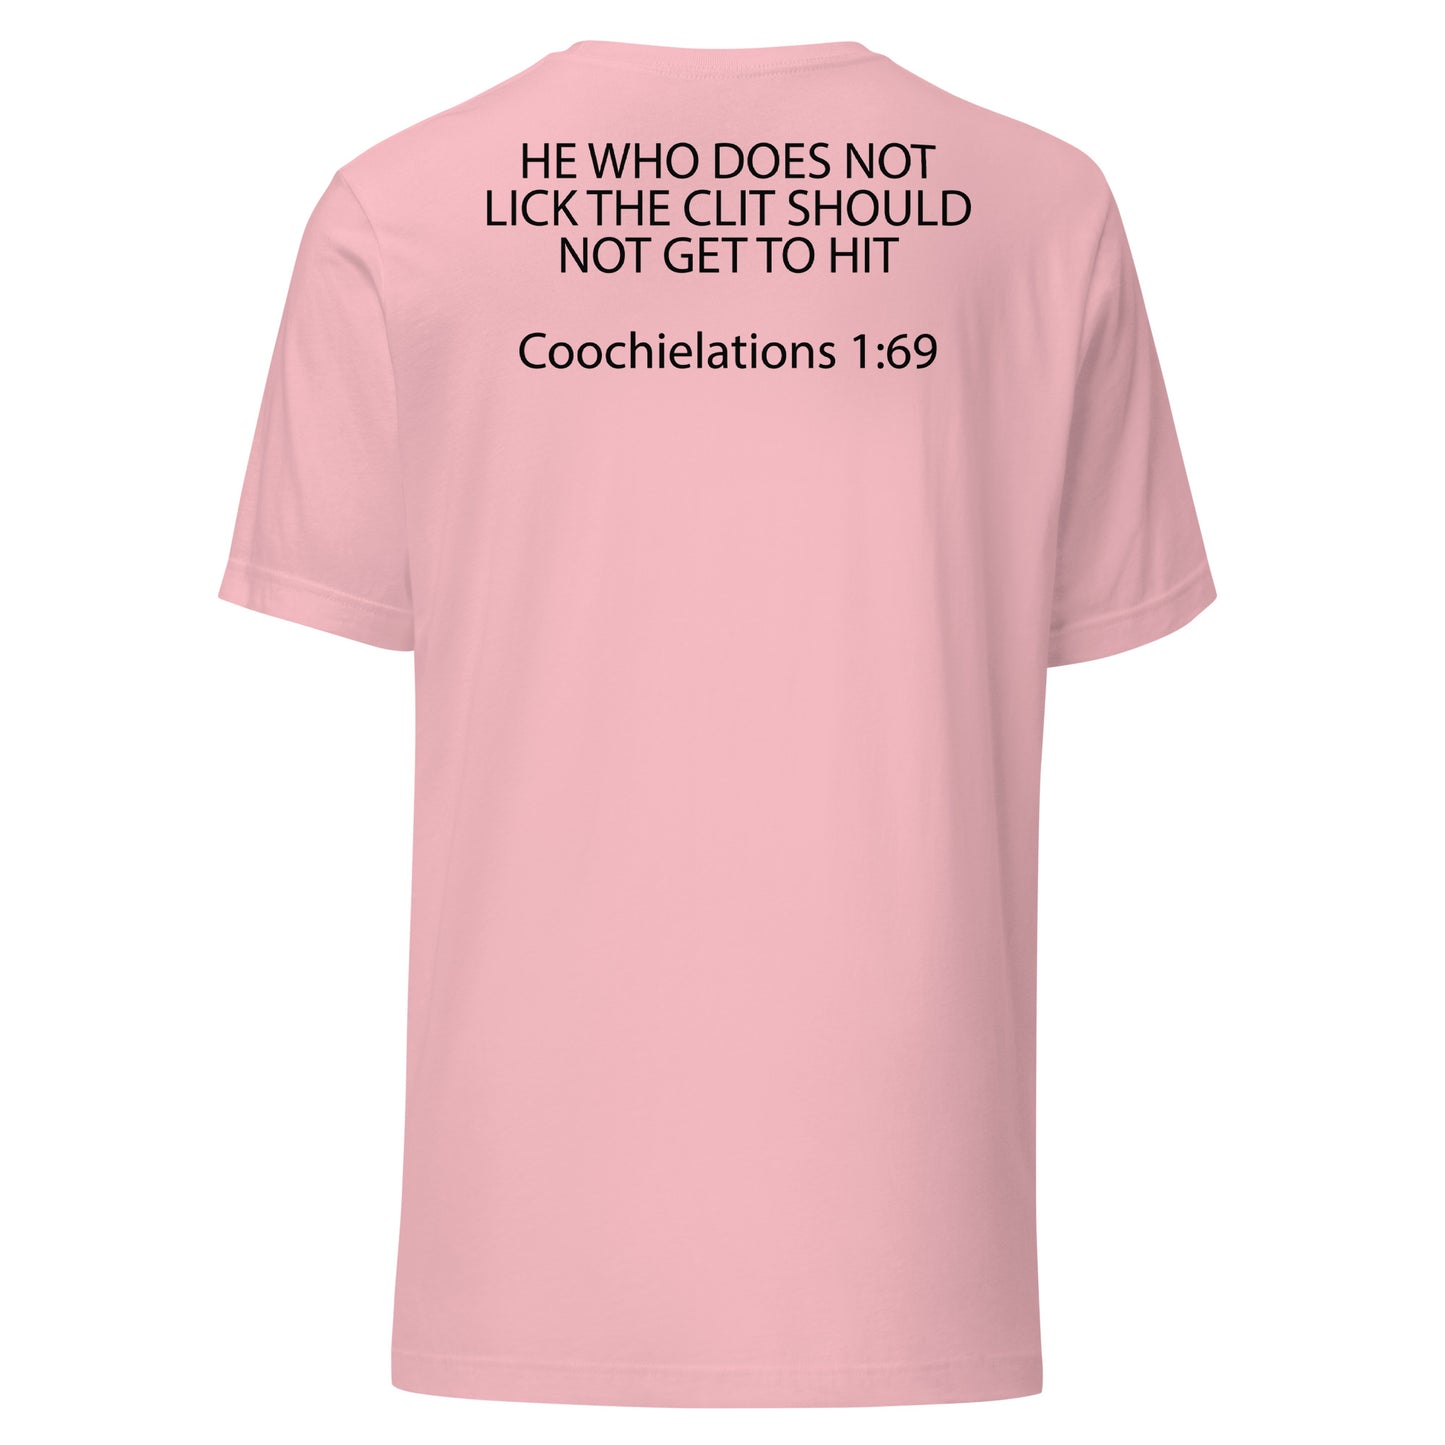 HE WHO DOES NOT LICK THE CLIT SHOULD Unisex t-shirt